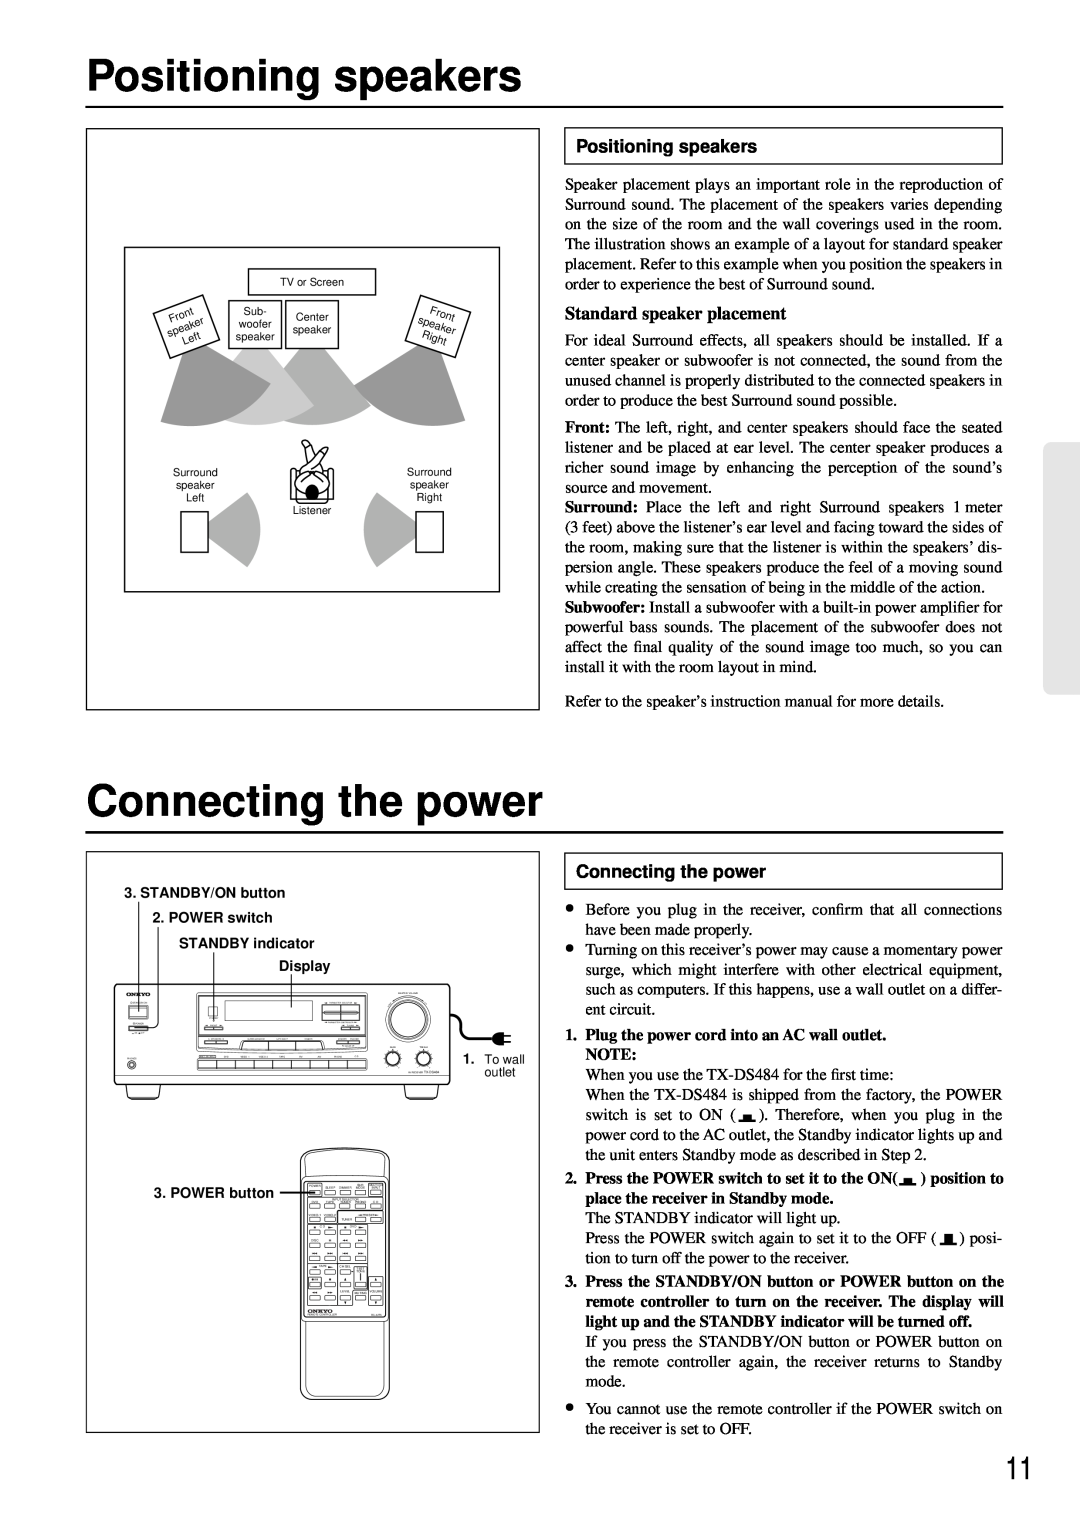 Onkyo TX-DS484 instruction manual Positioning speakers, Connecting the power, Standard speaker placement 